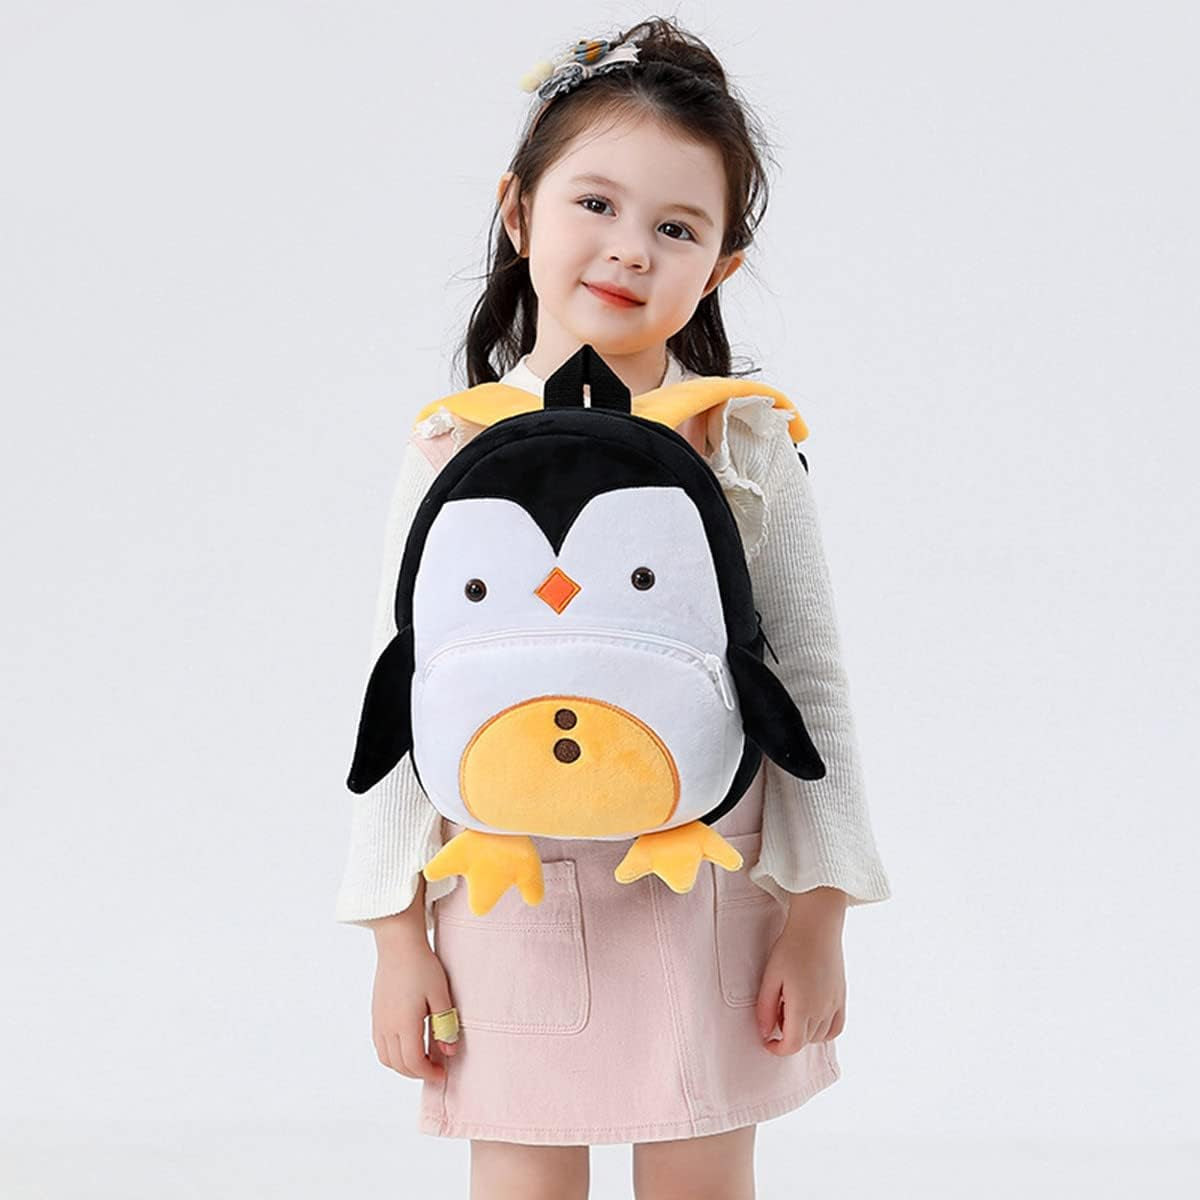 Toddler Backpack for Boys and Girls, Cute Soft Plush Animal Cartoon Mini Backpack Little for Kids 2-6 Years (Fuchsia Bunny)